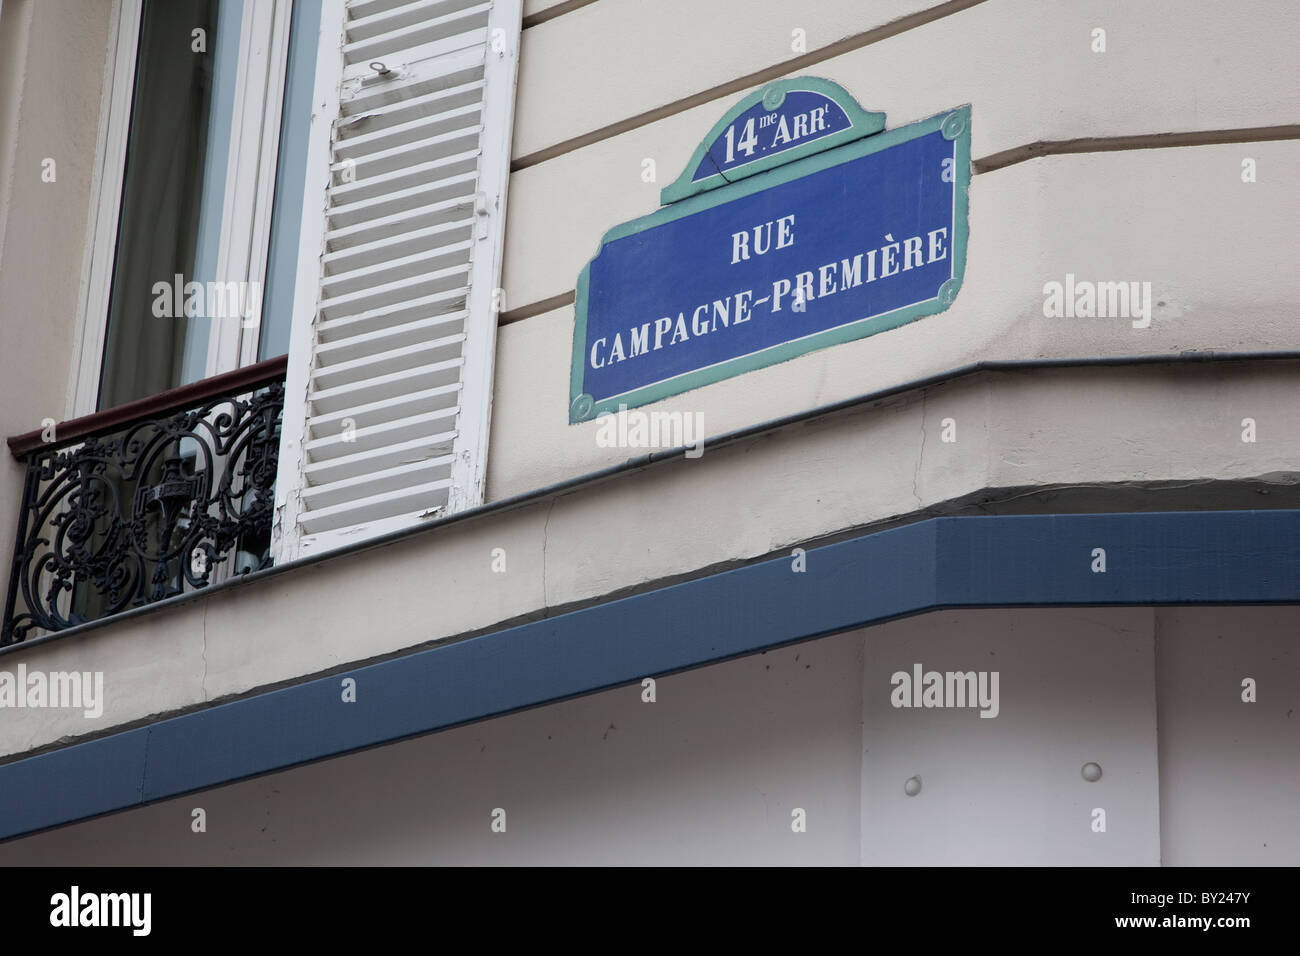 Campagne-Premiere Street Sign on wall in Paris, France Stock Photo